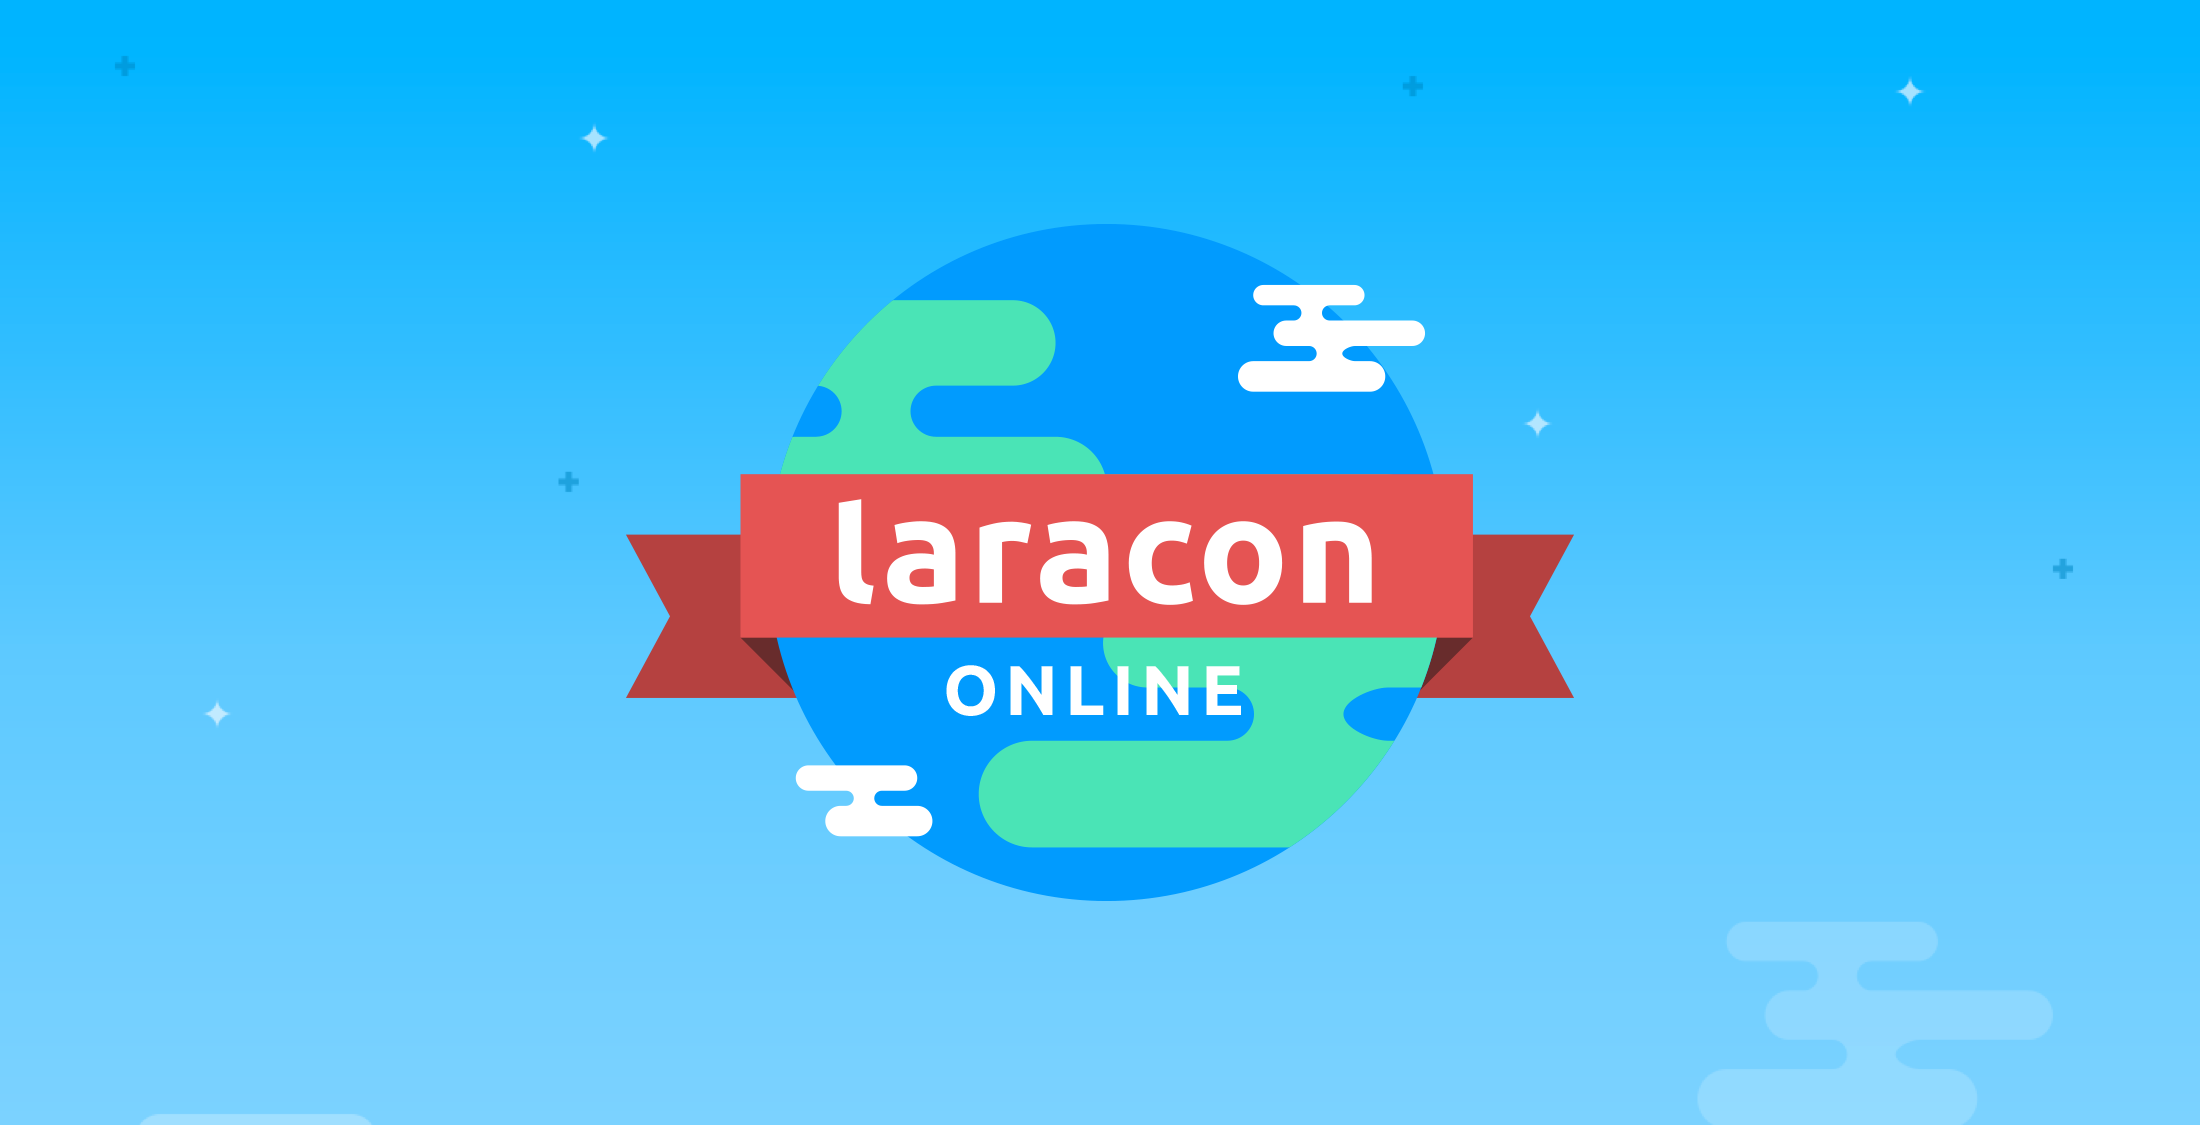 Laracon Online Schedule and FAQ image